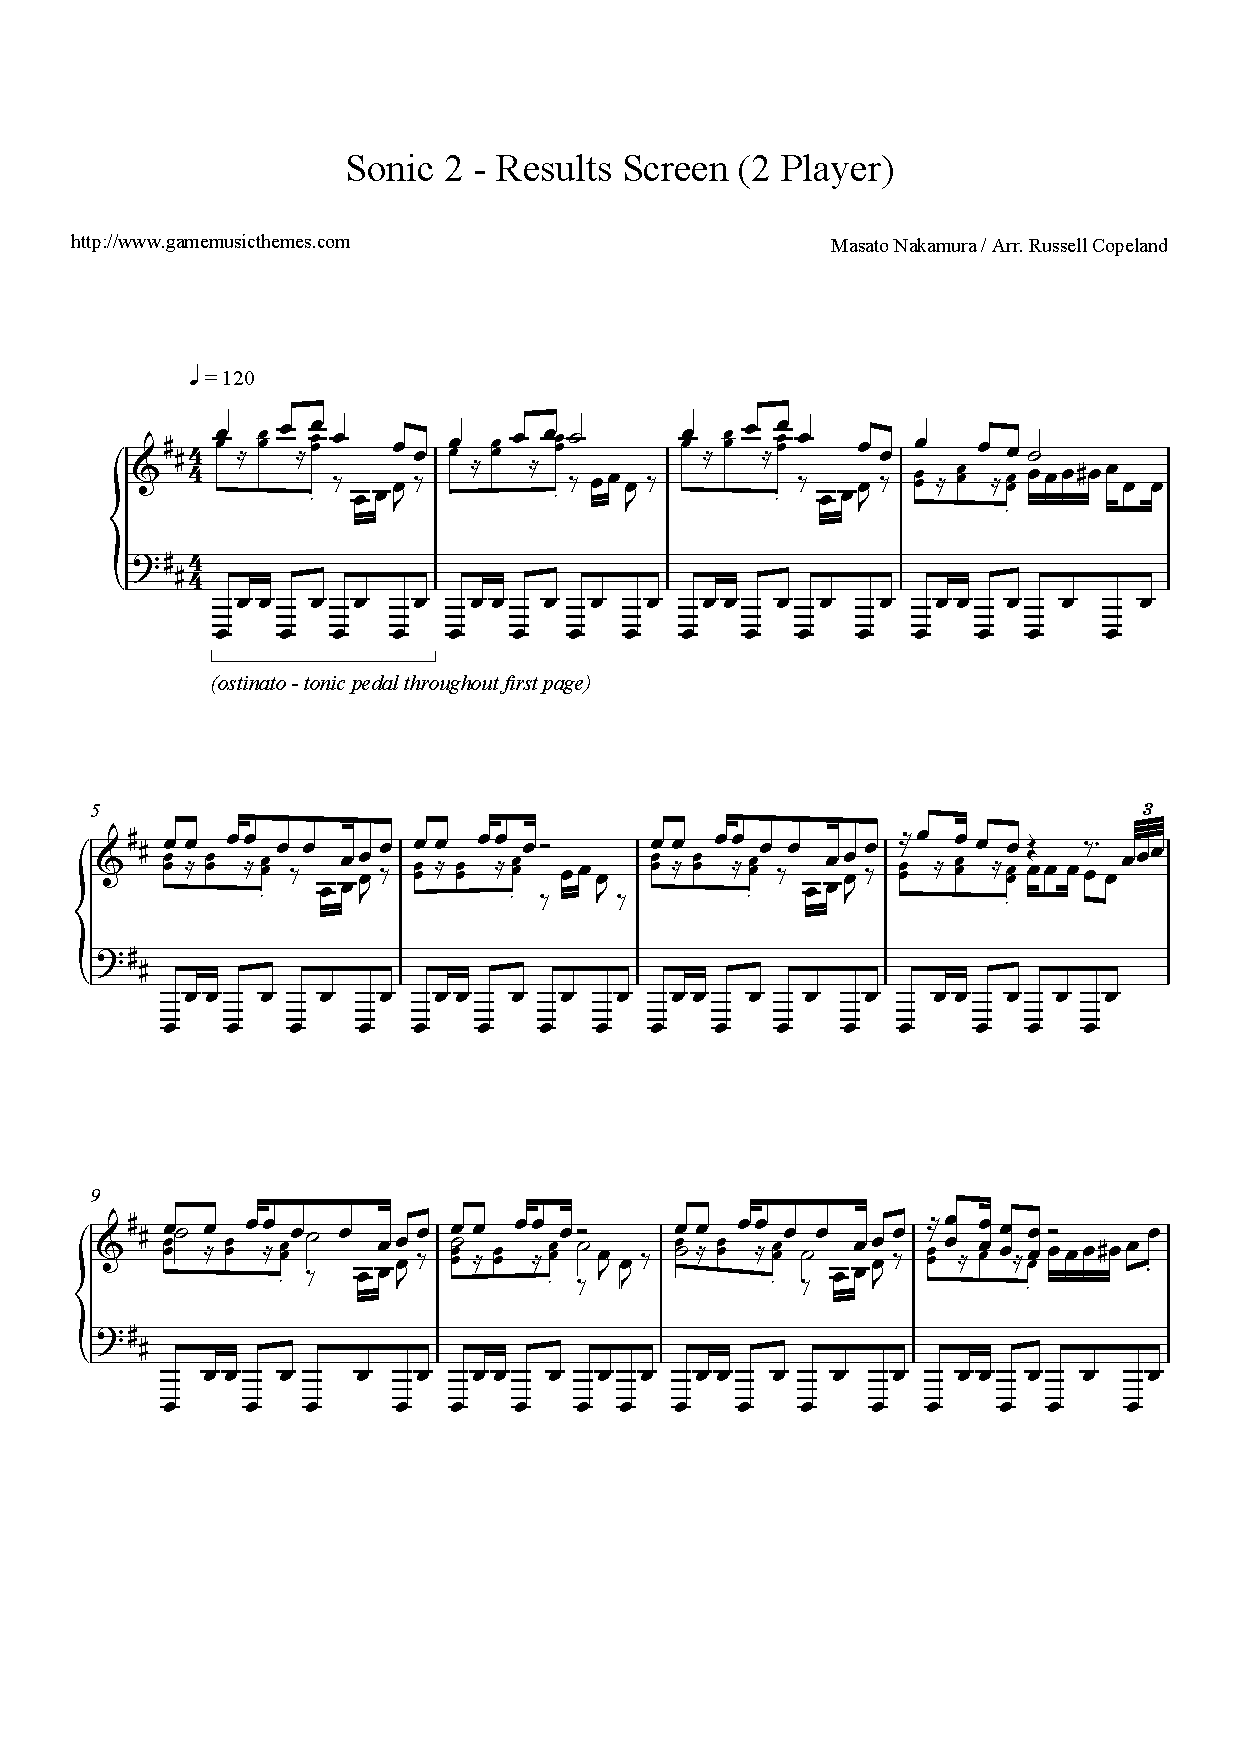 Robotnik's Theme from Sonic the Hedgehog 2 Sheet music for Piano (Solo)